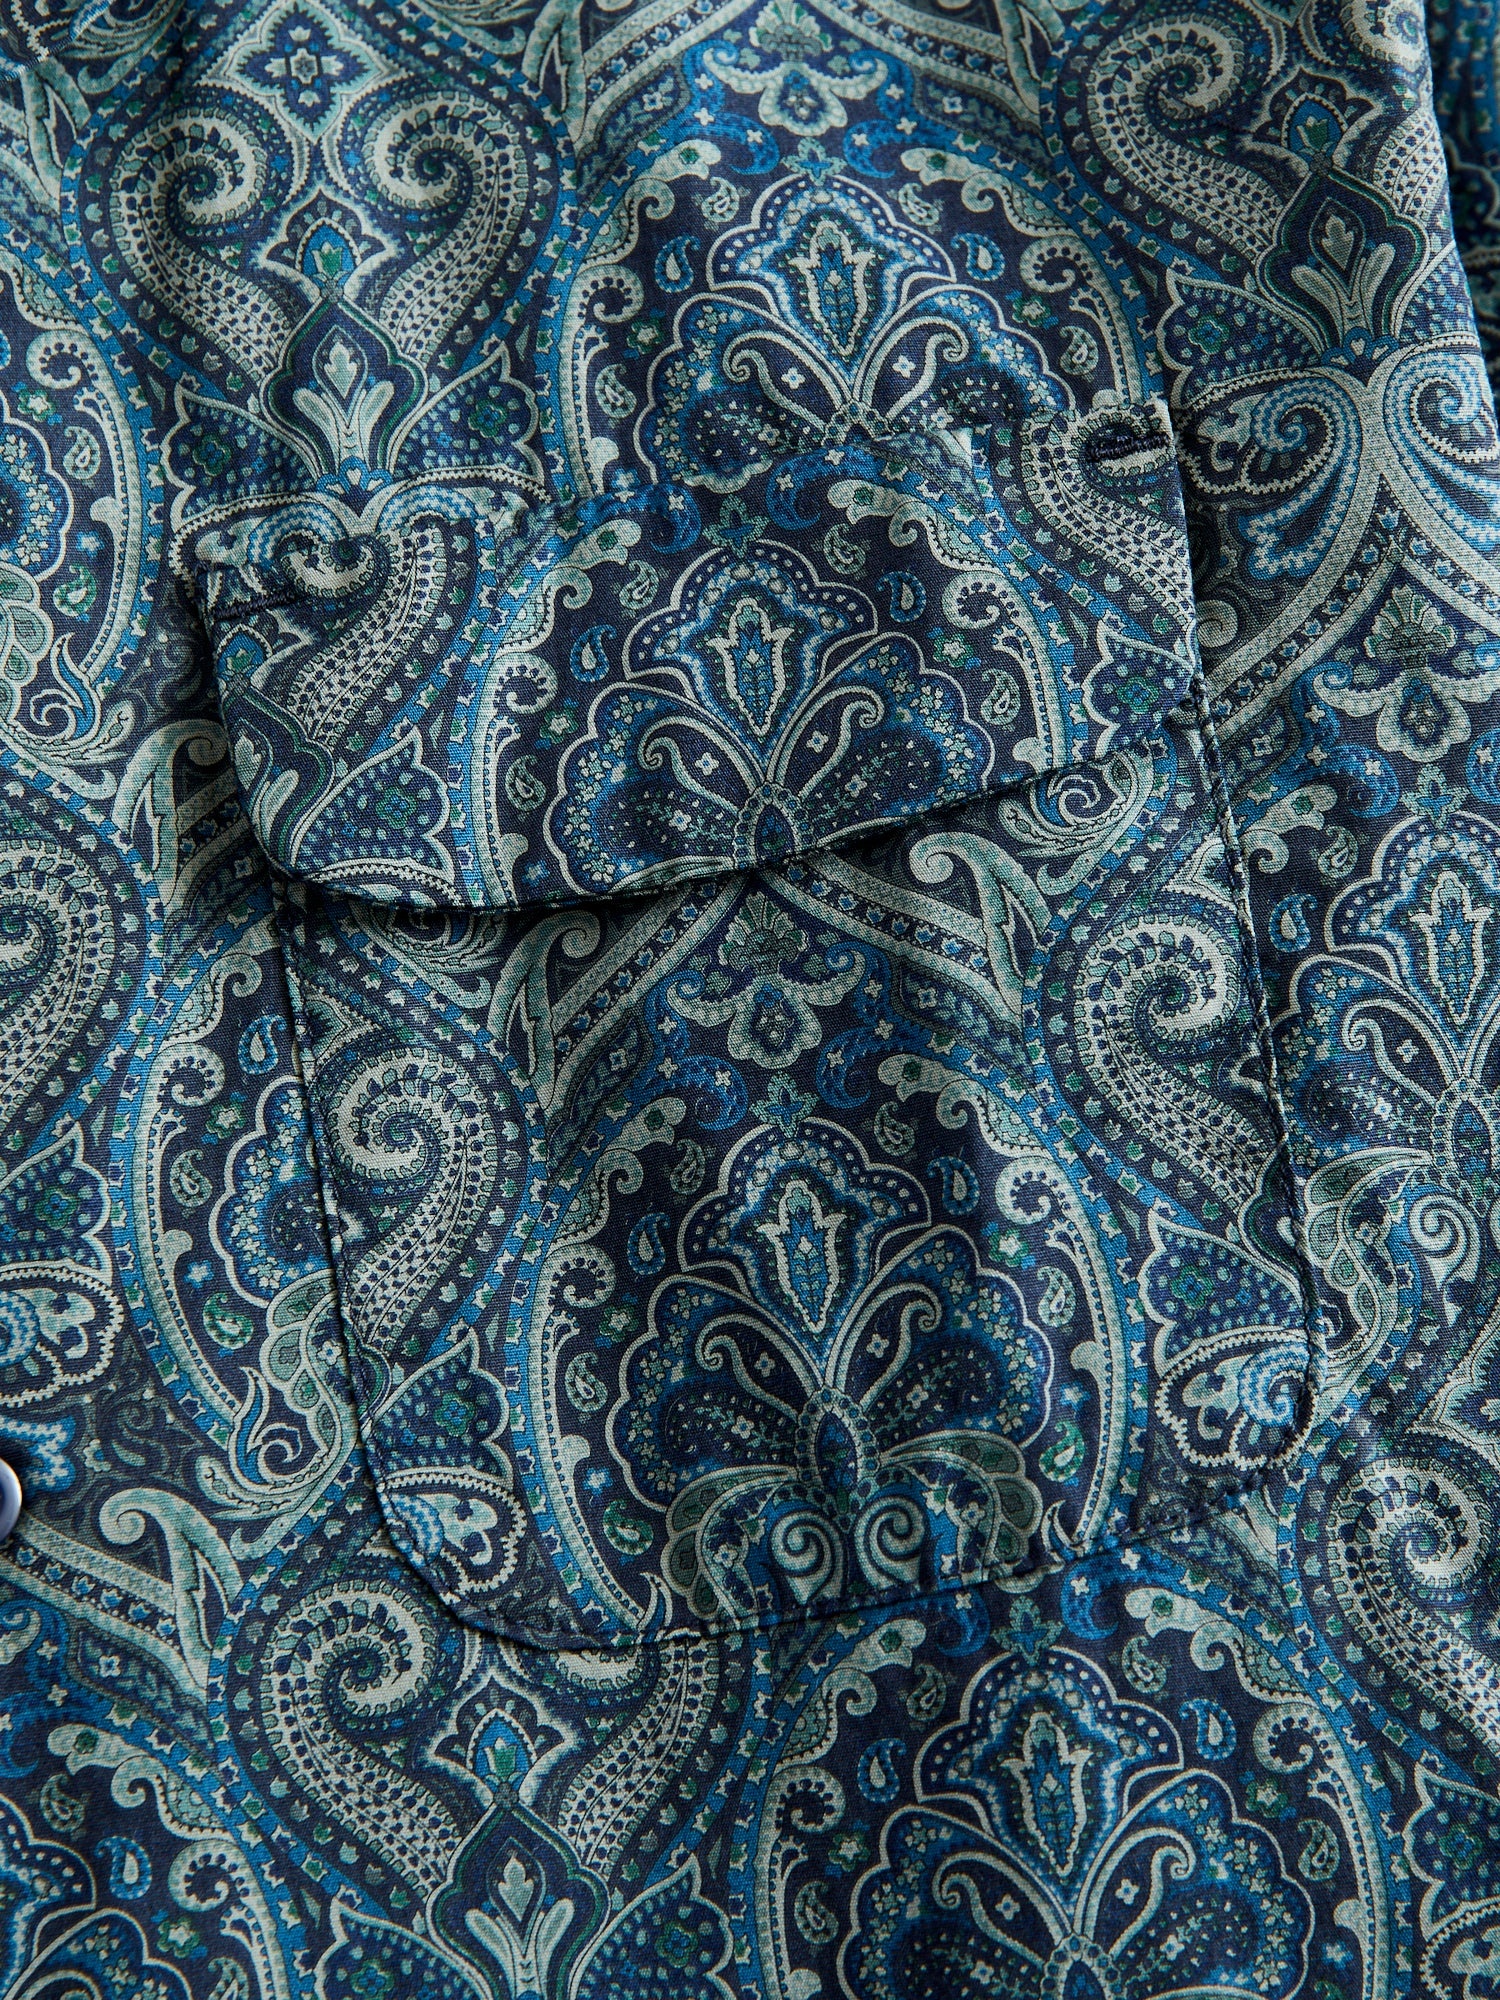 Classic Shirt in Navy Cotton Paisley Print - 5